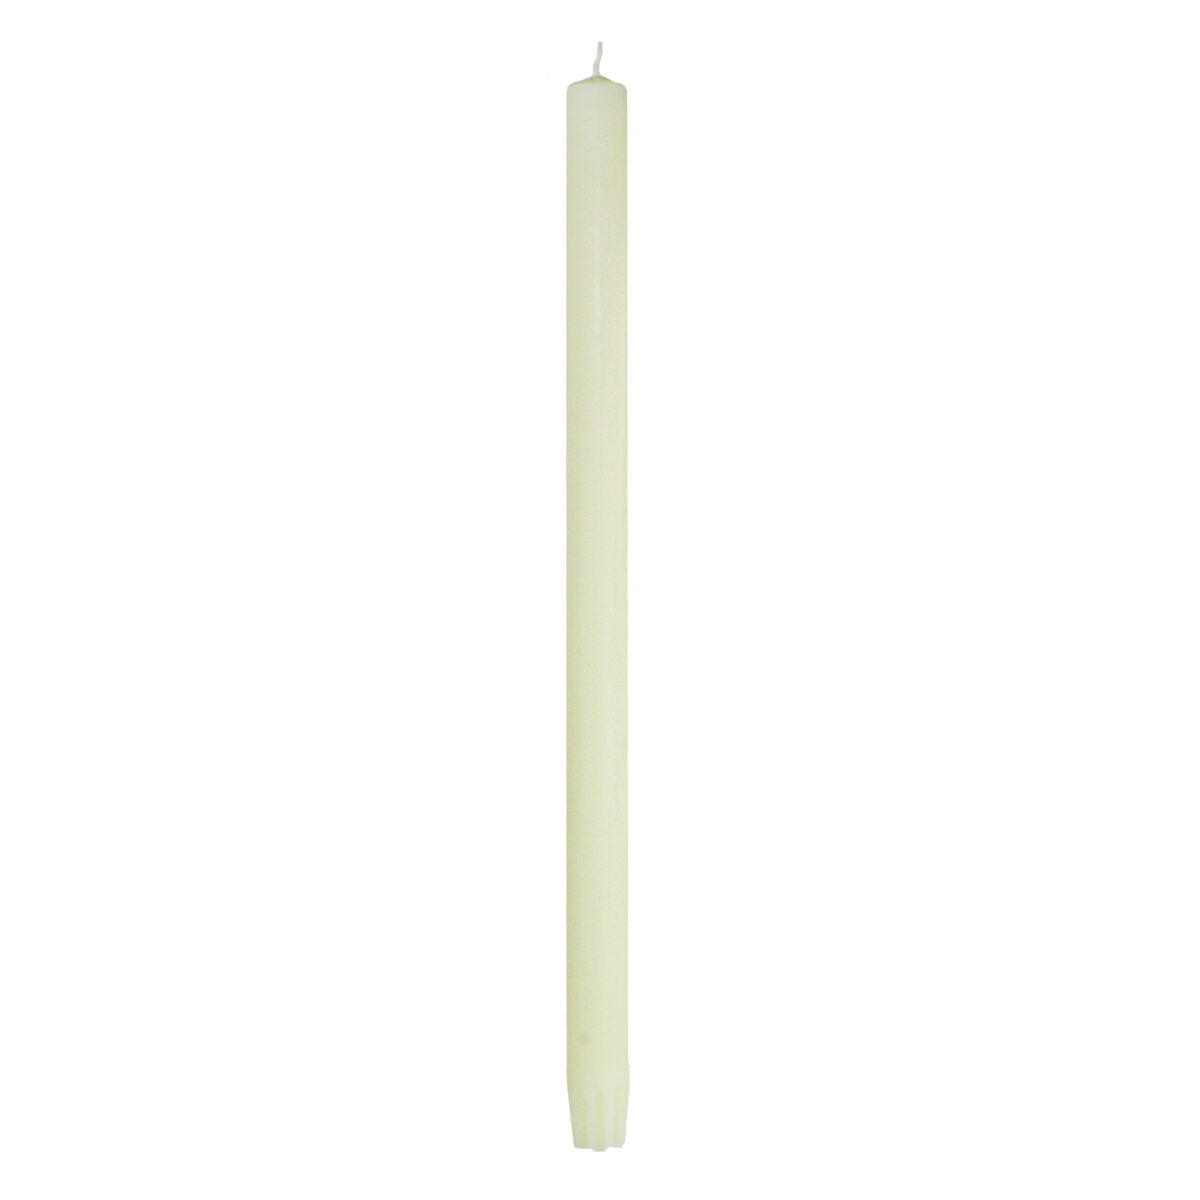 51% 1-1/4" X 19-1/2" Self fitting End Candle Stock